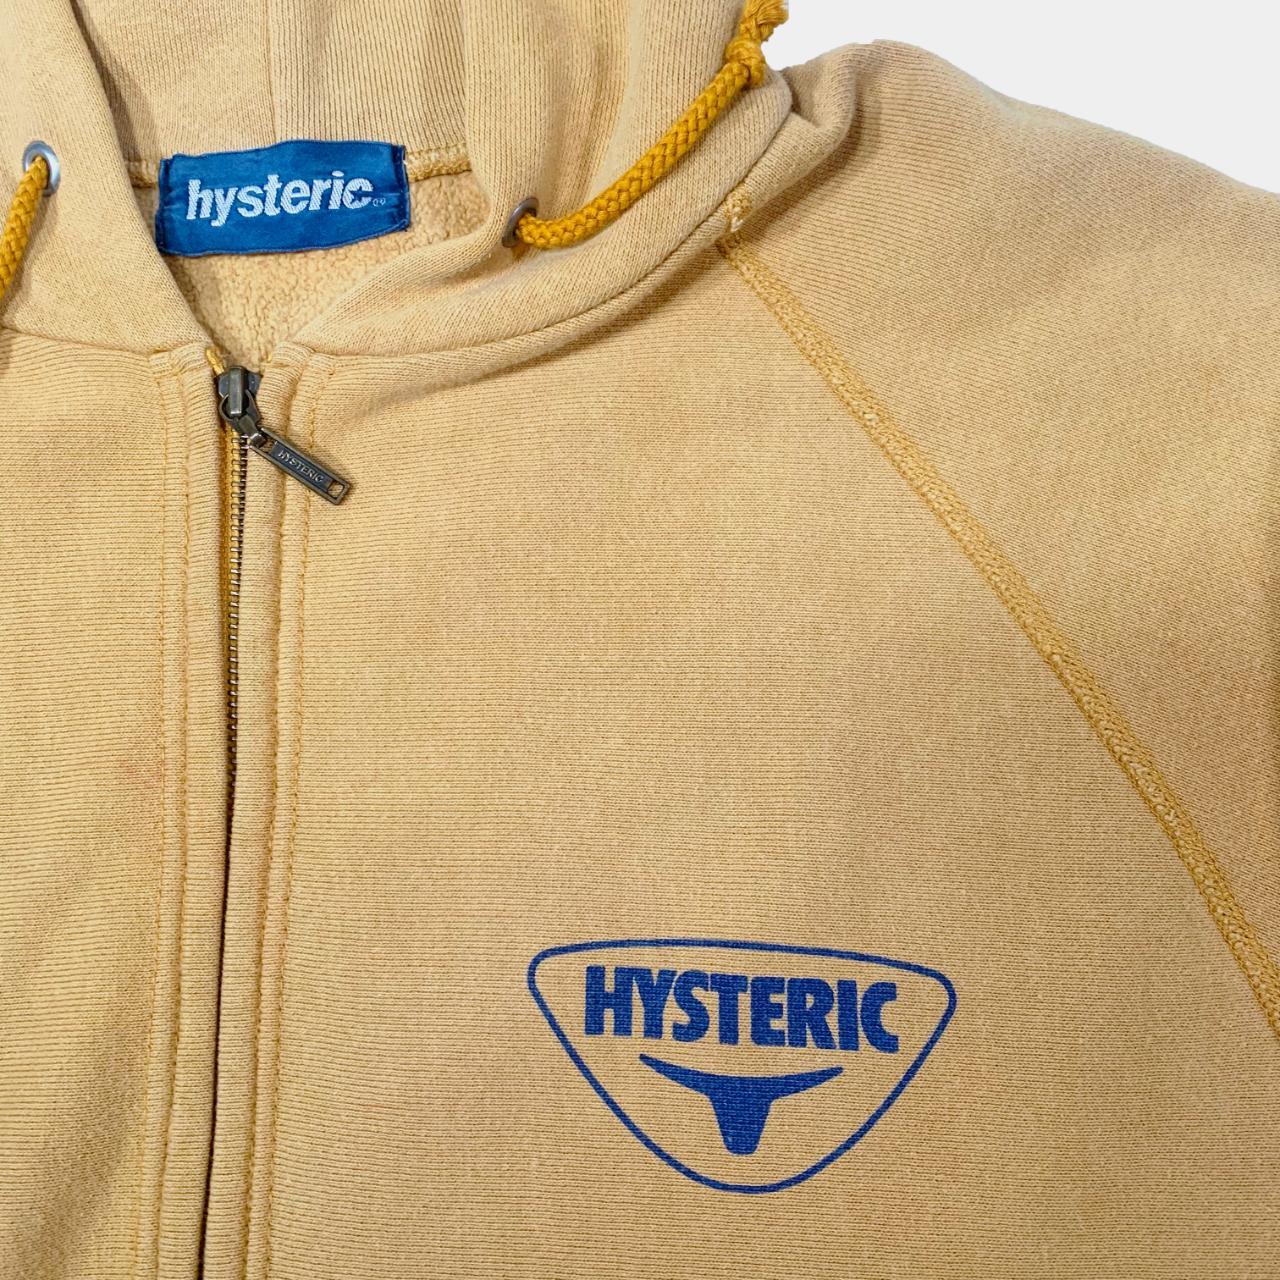 Hysteric Glamour Zip Up Hoodie Yellow/Blue:   Depop